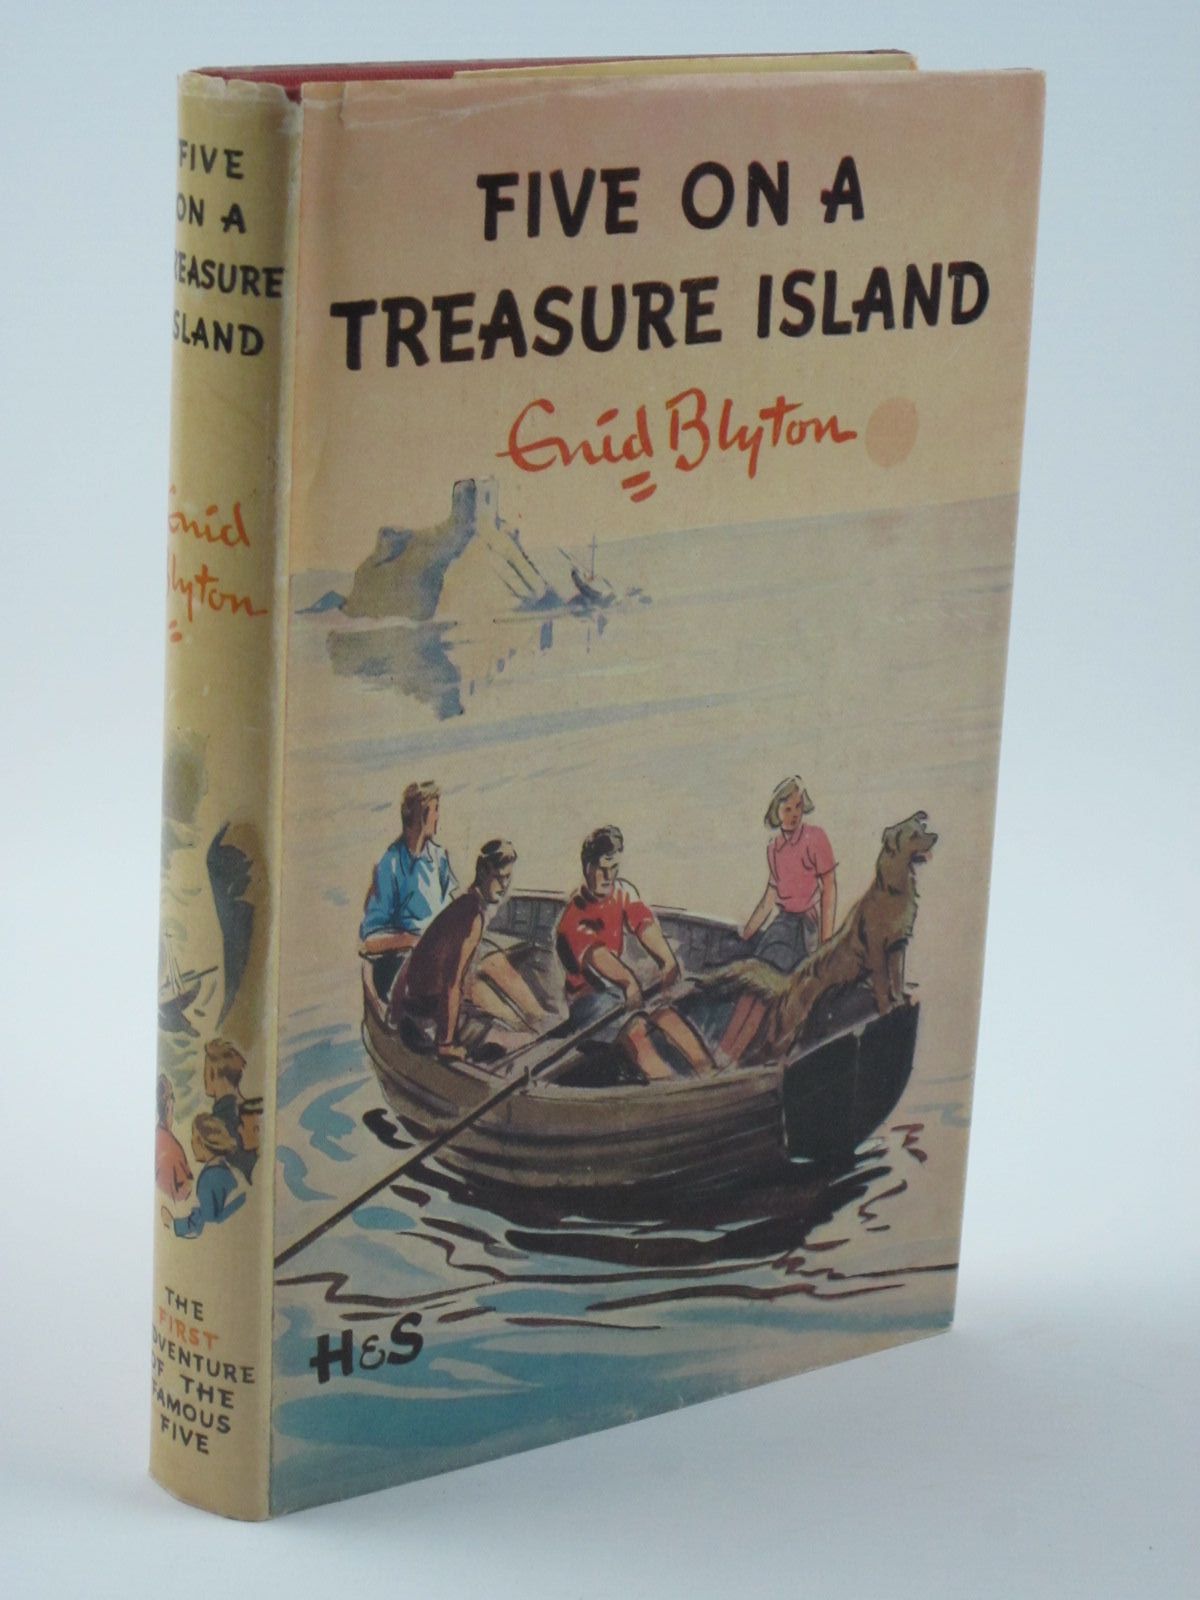 Cover of FIVE ON A TREASURE ISLAND by Enid Blyton